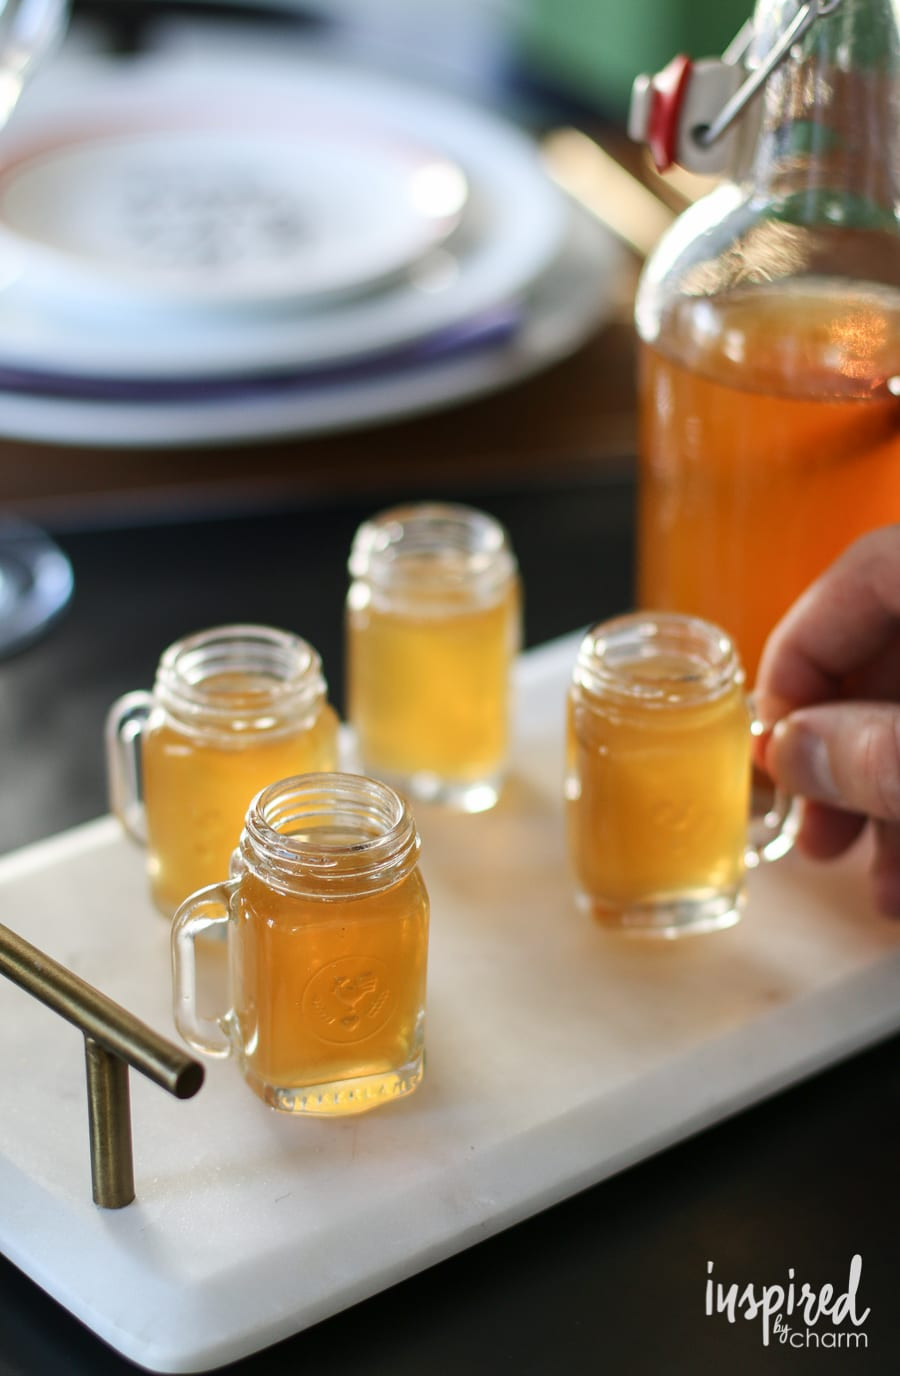 Apple Pie Moonshine
 Apple Pie Moonshine simple to make and loaded with flavor